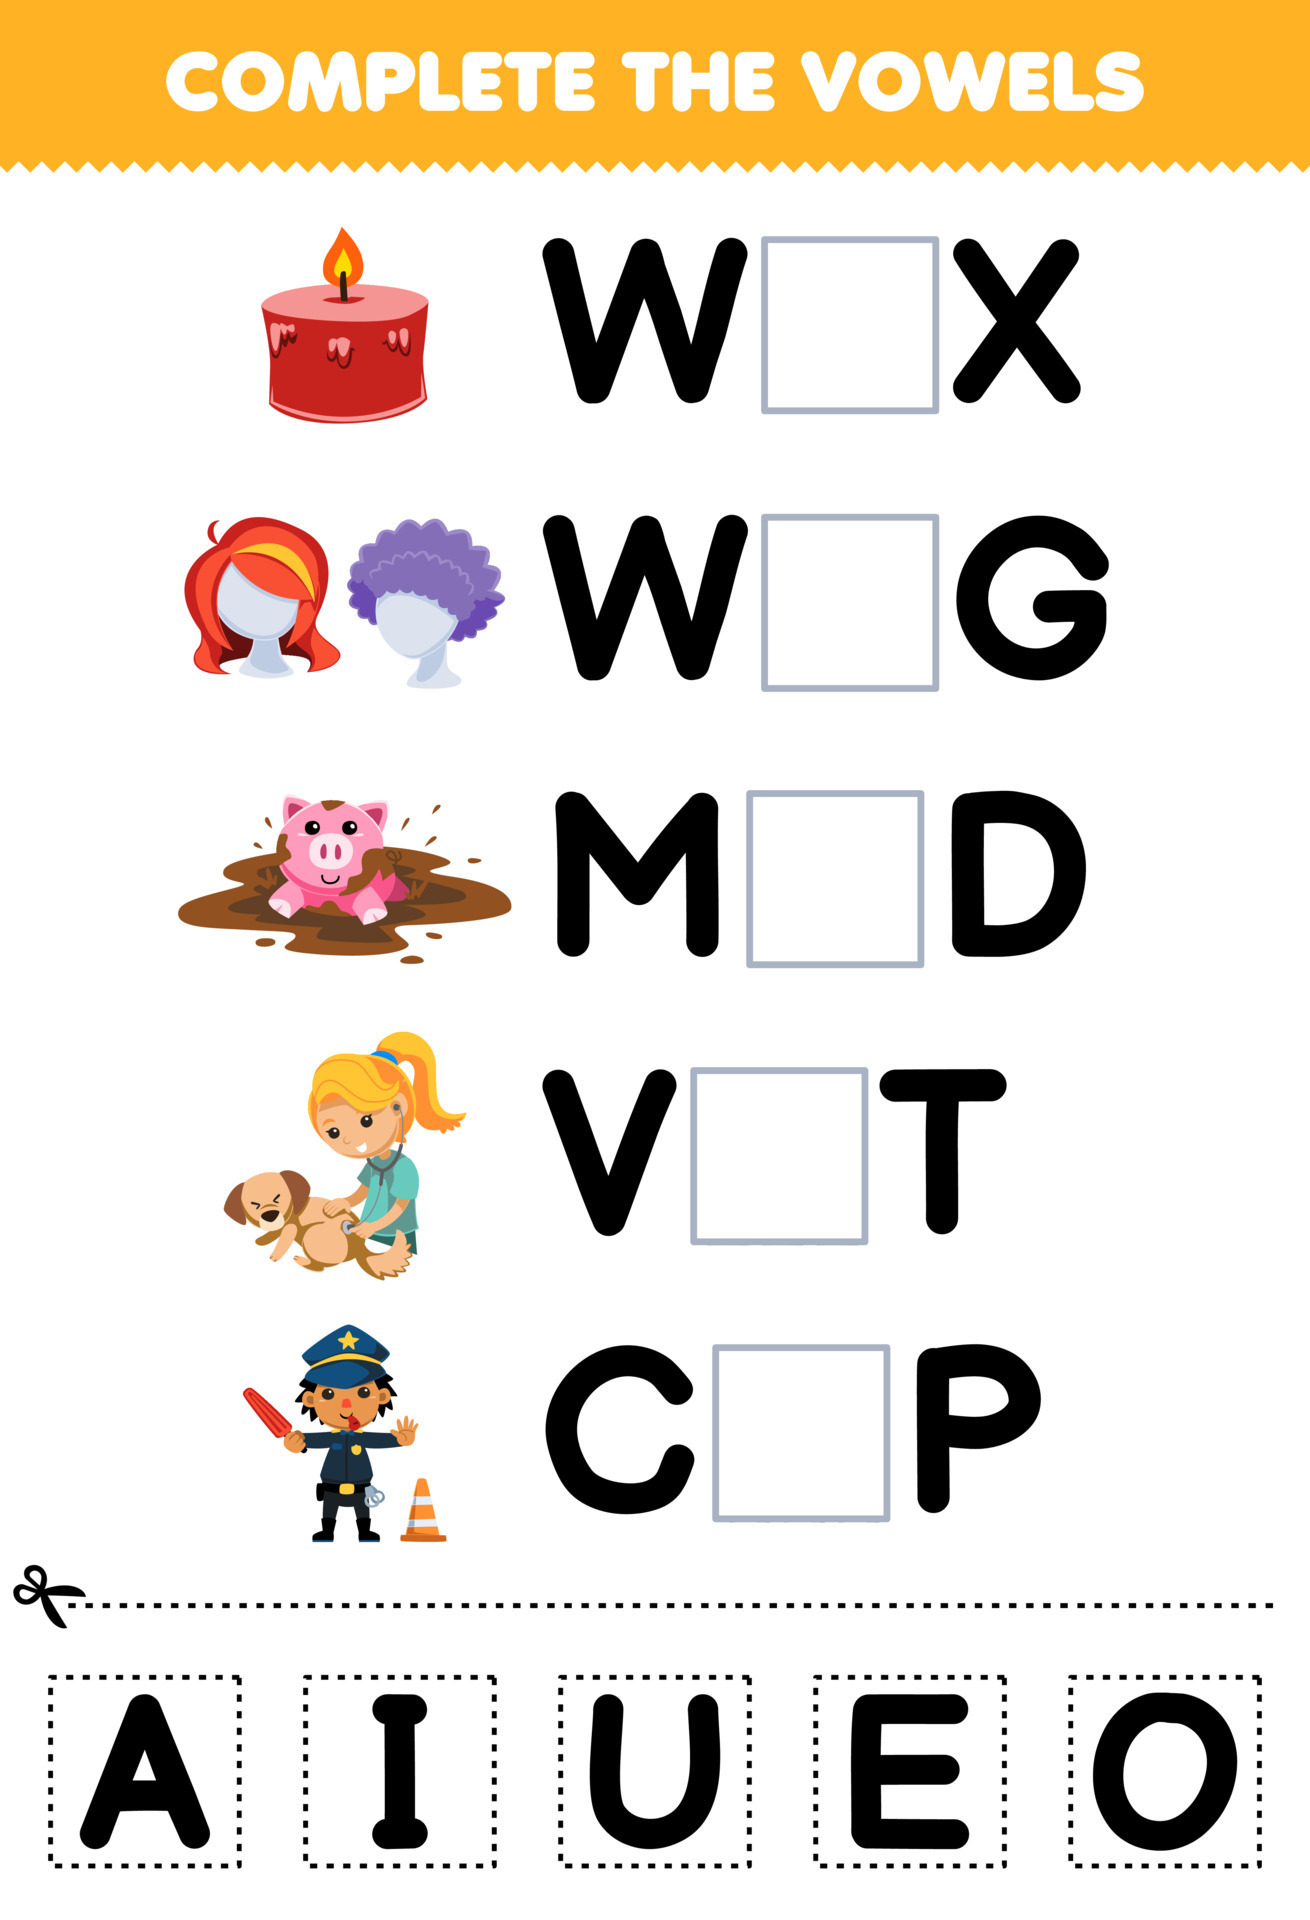 Education game for children complete the vowels of cute cartoon wax wig mud  vet cop illustration printable worksheet 11208148 Vector Art at Vecteezy